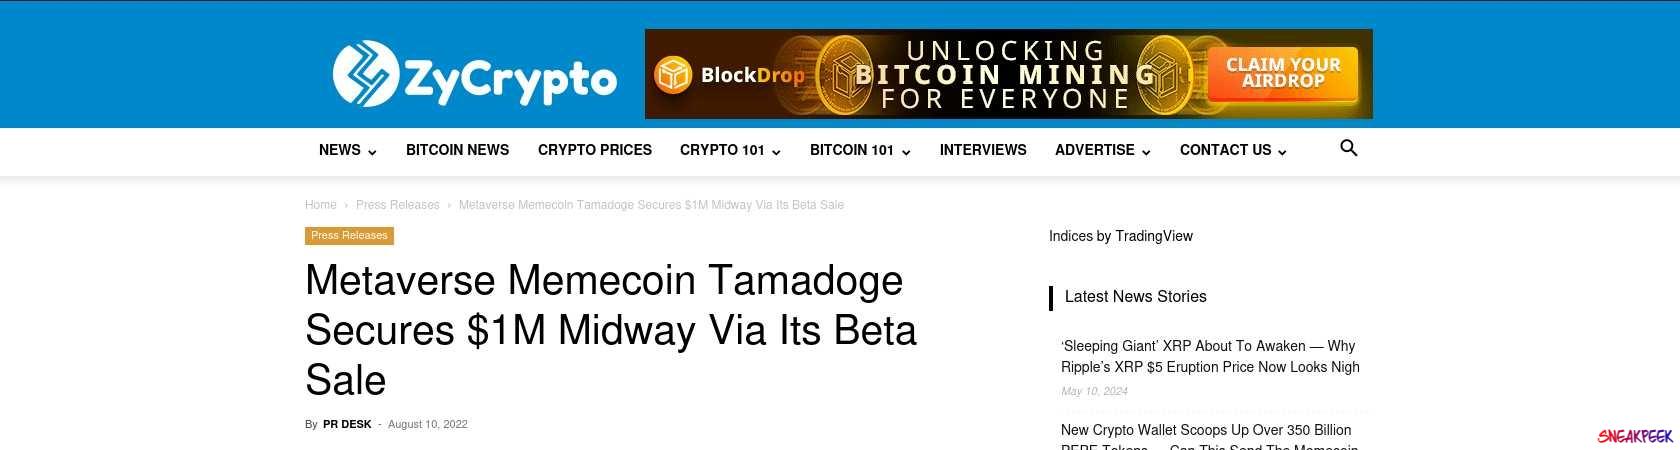 Read the full Article:  ⭲ Metaverse Memecoin Tamadoge Secures $1M Midway Via Its Beta Sale